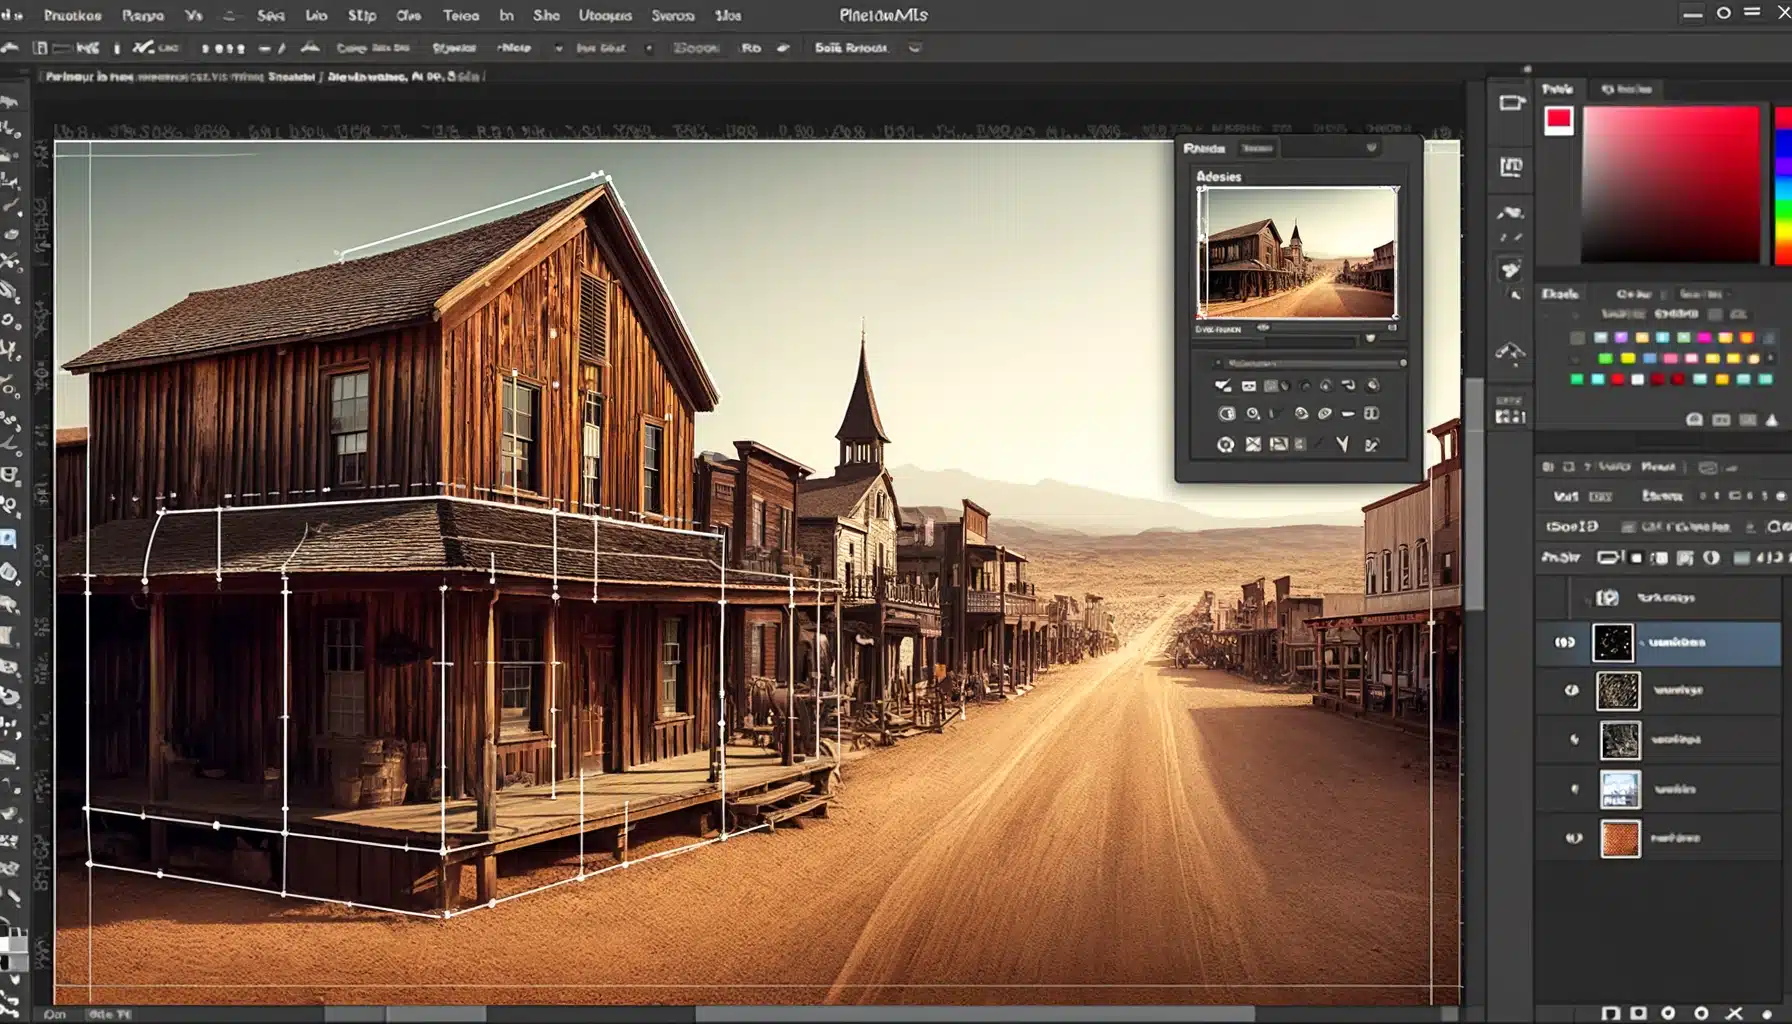 Digital image of a ghost town being edited in Photoshop